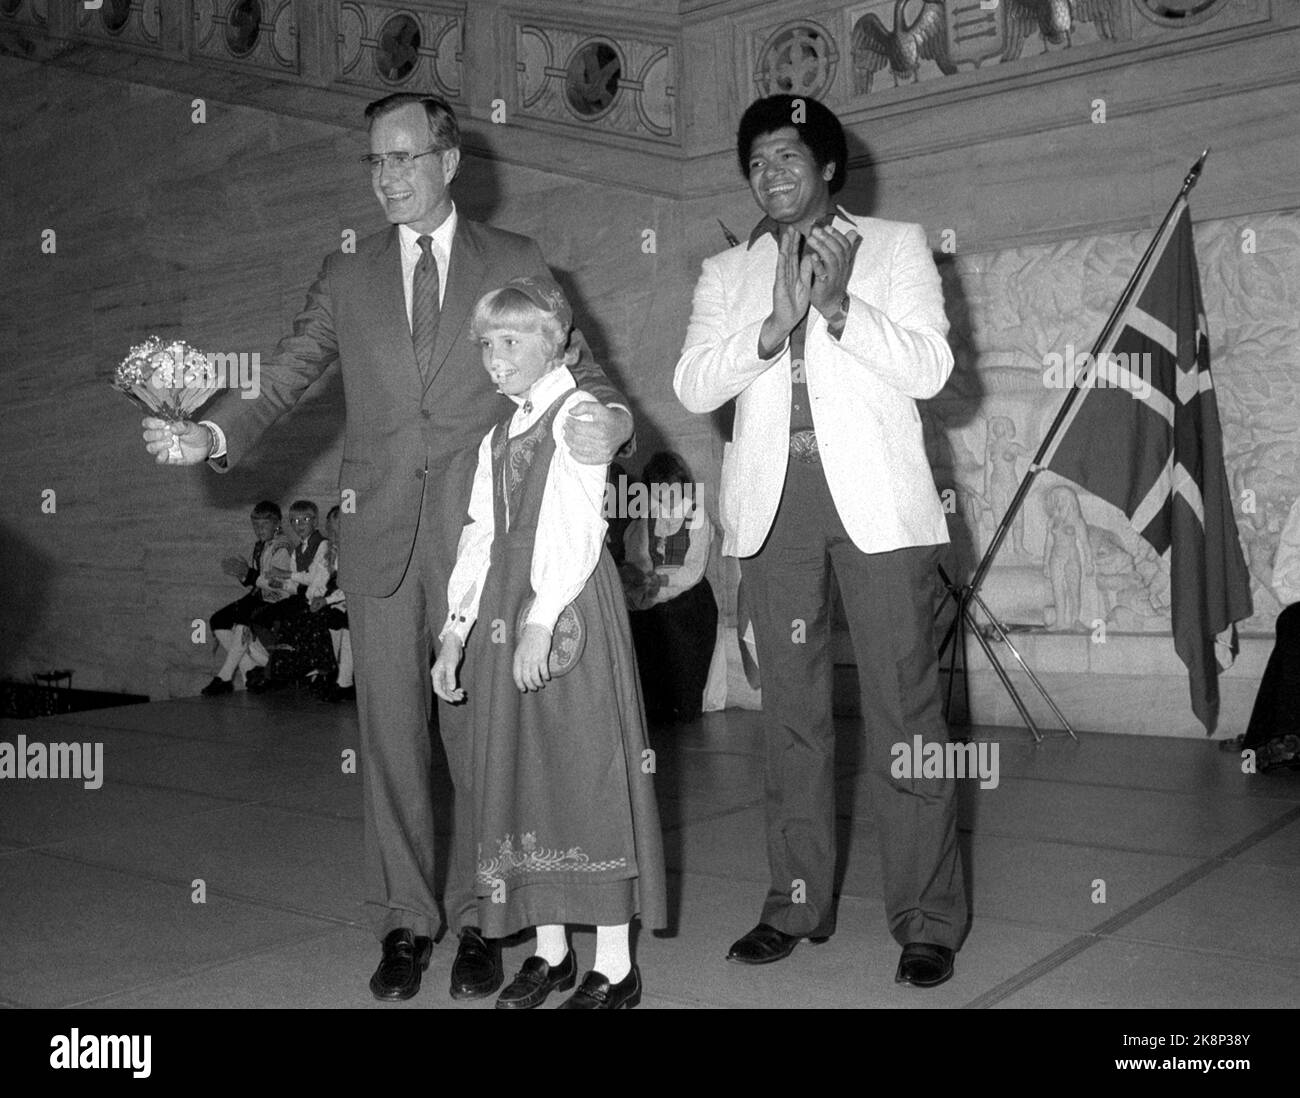 Oslo 19830629. USA Vice President George Bush on an official visit to Norway. Cultural event in Oslo City Hall. Bush receives flowers from girl in bunad. Singer Bobby Lee to H. Photo: Erik Thorberg / NTB Stock Photo